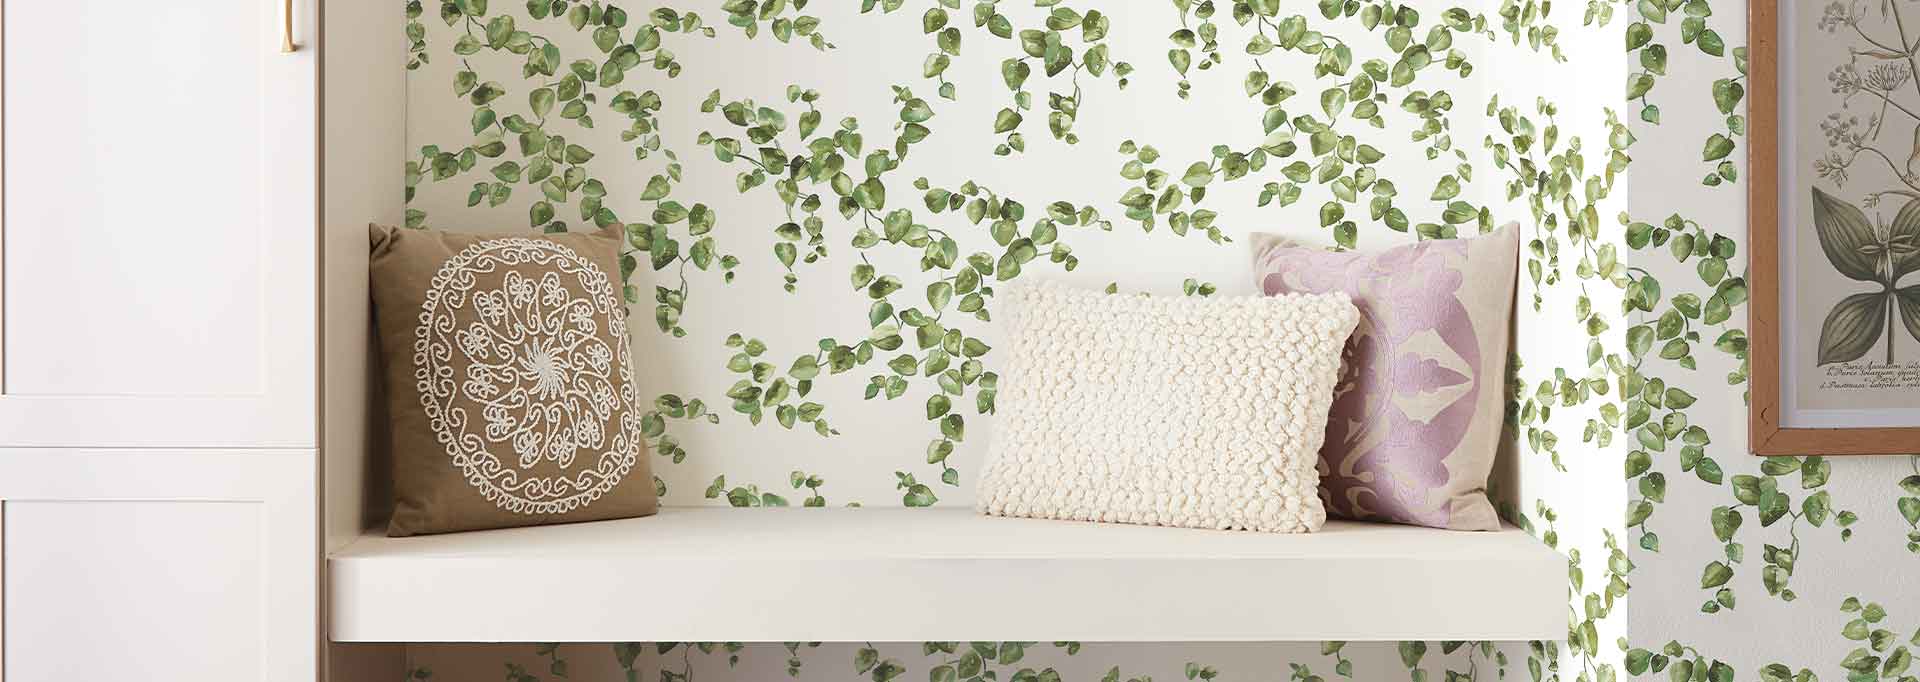 Buy Modern Farmhouse Wallpaper Online In India  Etsy India